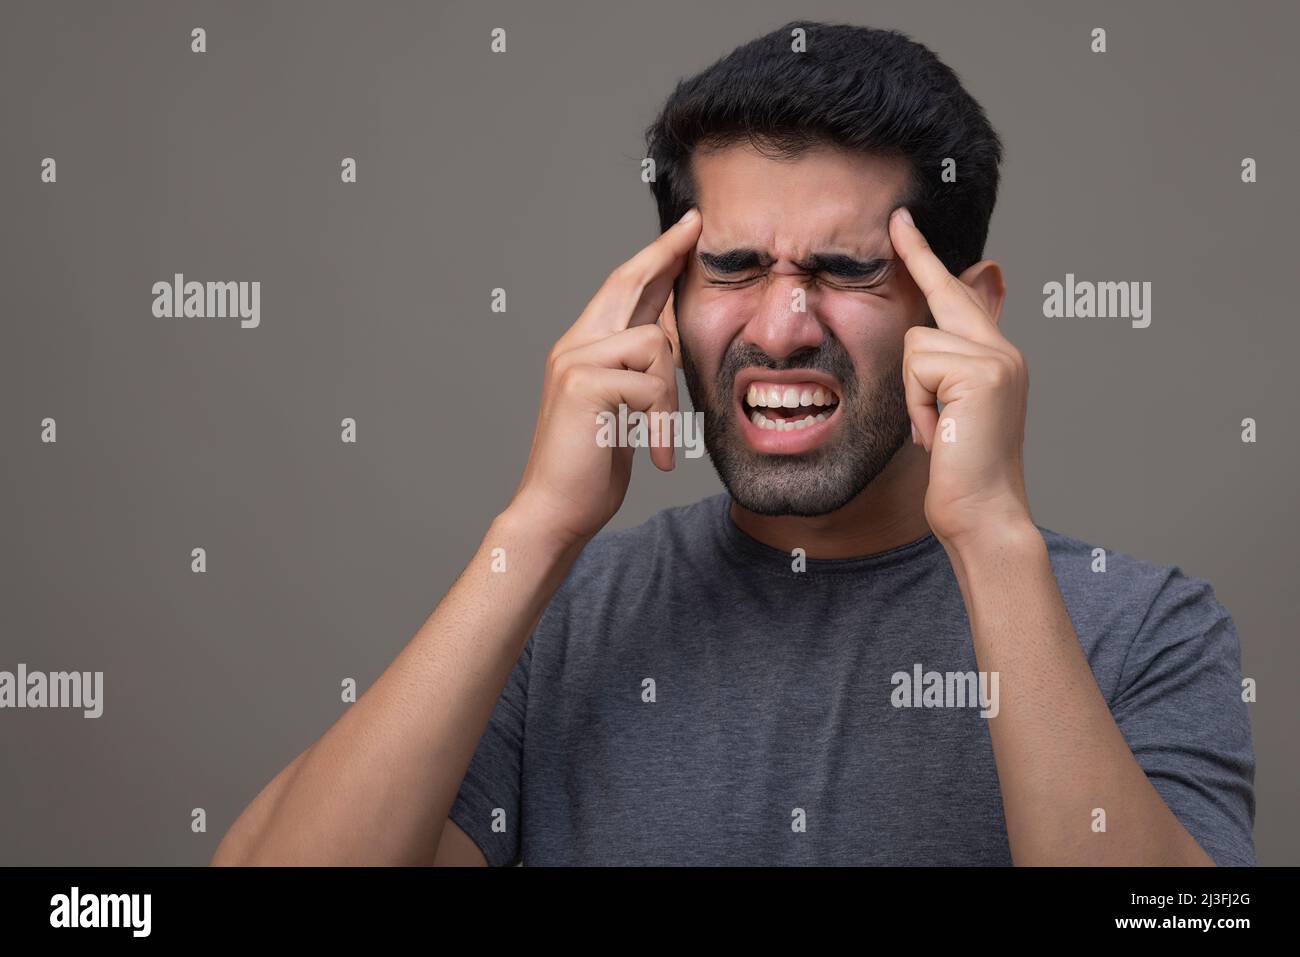 Portrait of a young man suffering from headache with hands on forehead Stock Photo